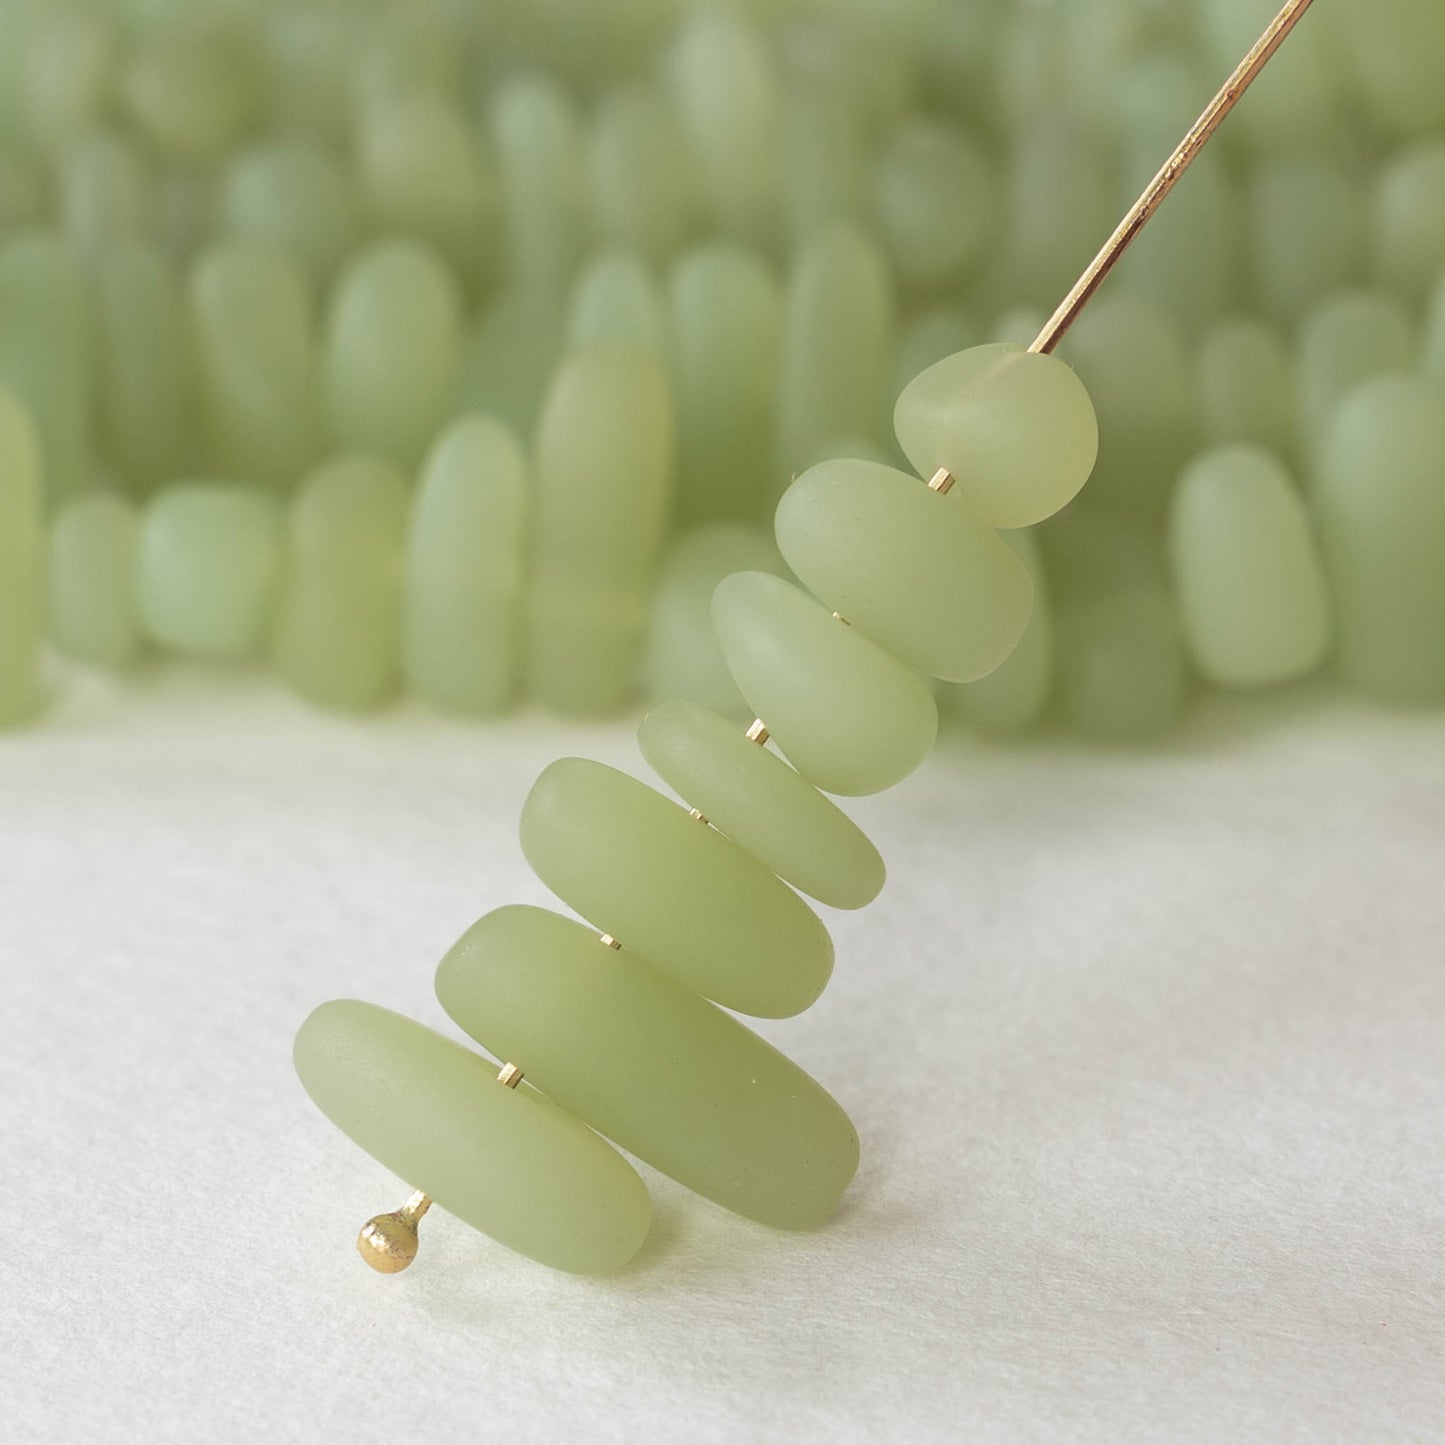 8-13mm Frosted Glass Pebbles - Opaque Light Olive Green ~ 50 Beads